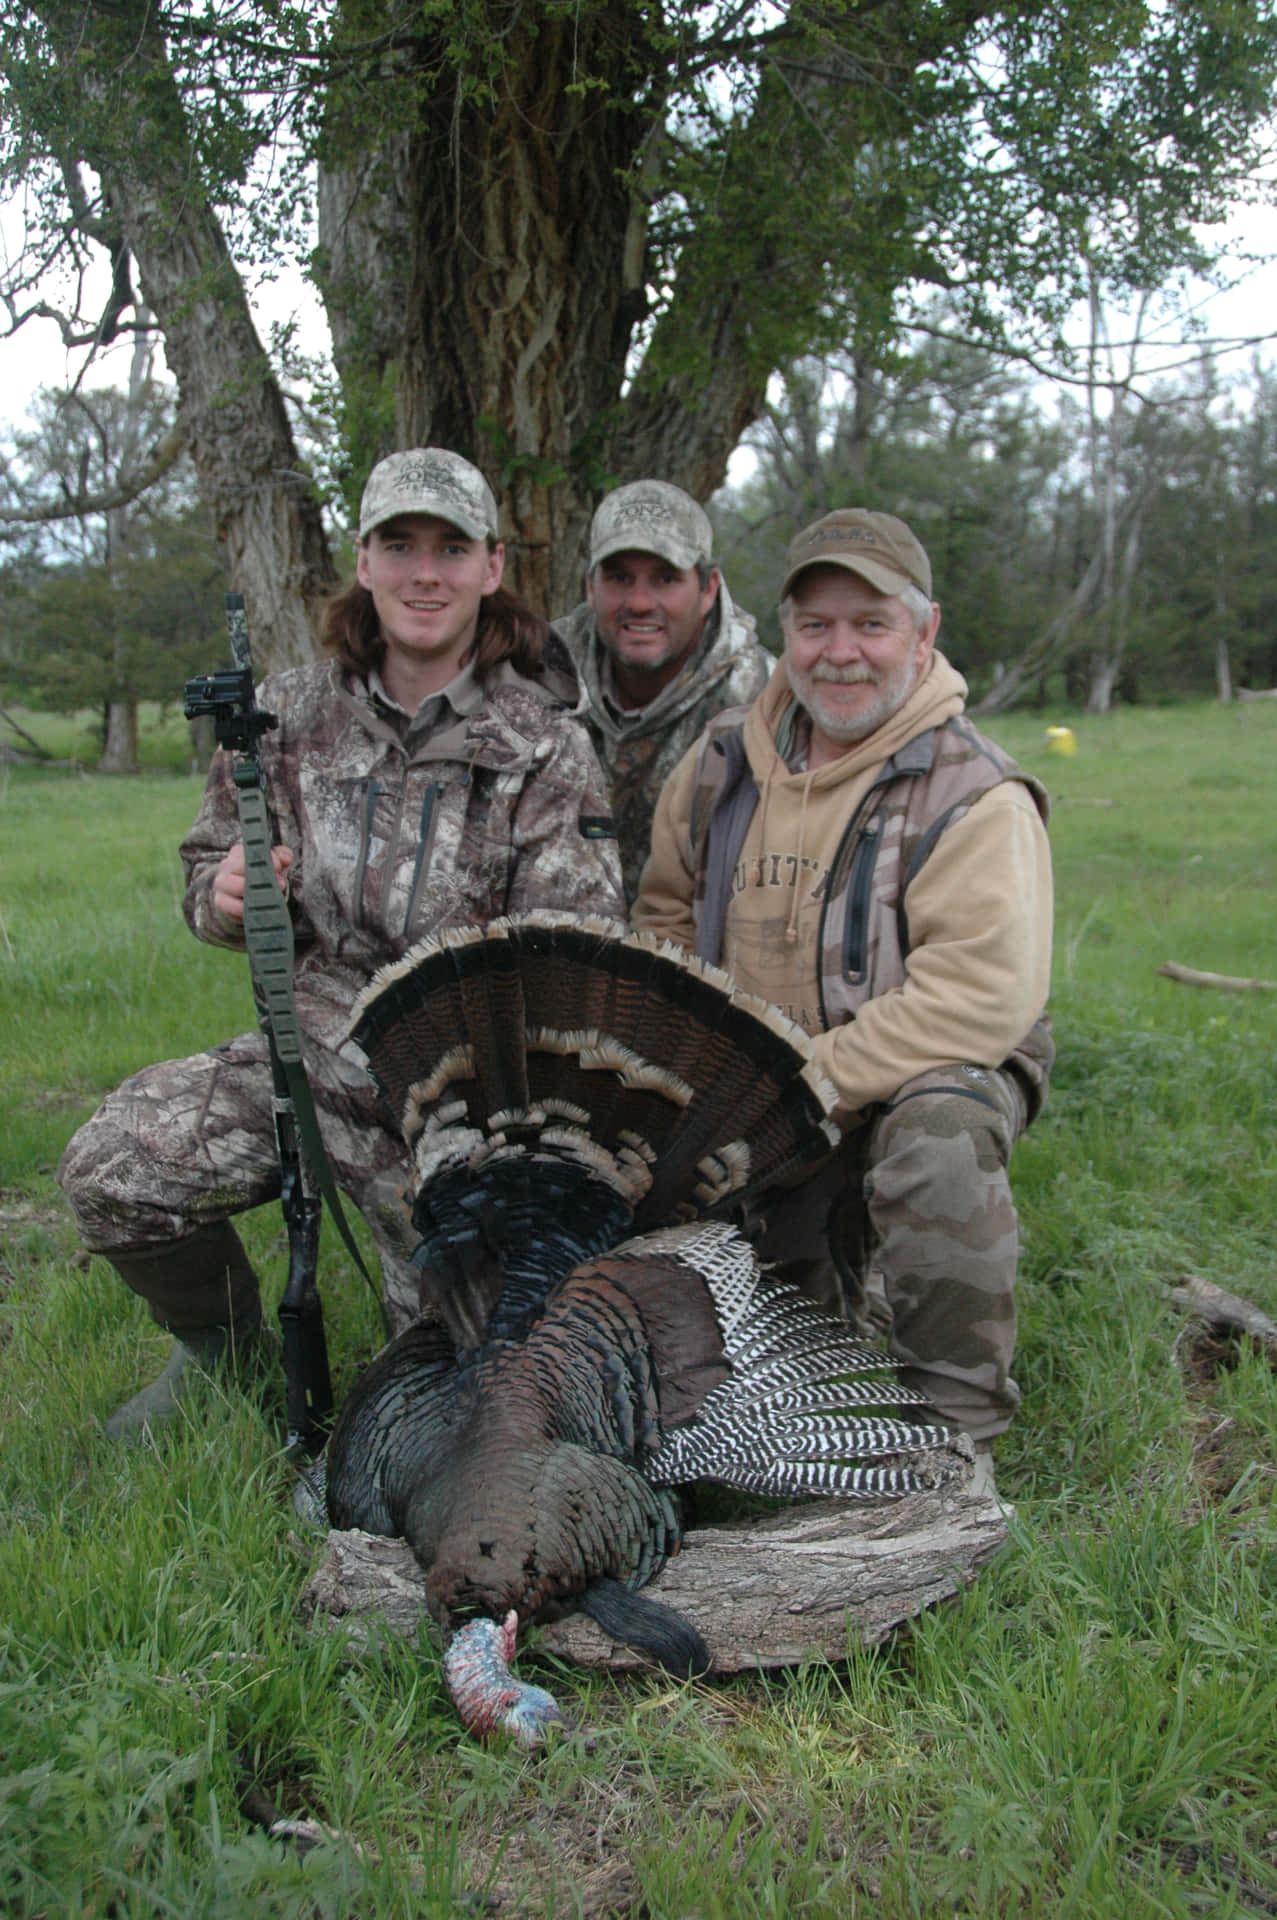 “Find your perfect shot this turkey hunting season!” Wallpaper